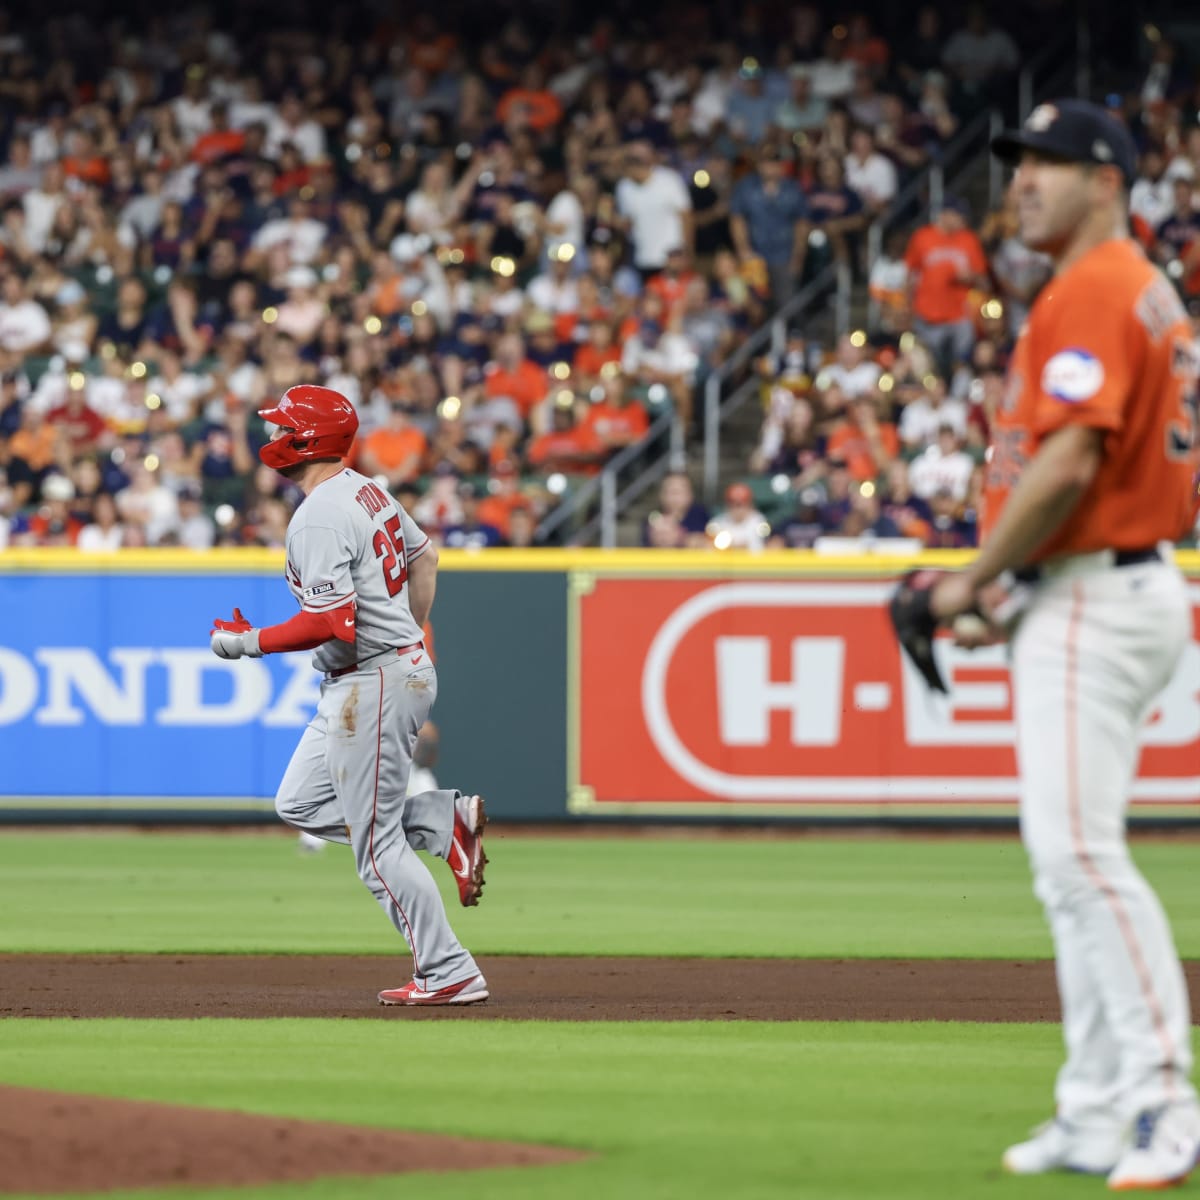 C.J. Cron is back with a vengeance to prove himself to the LA Angels